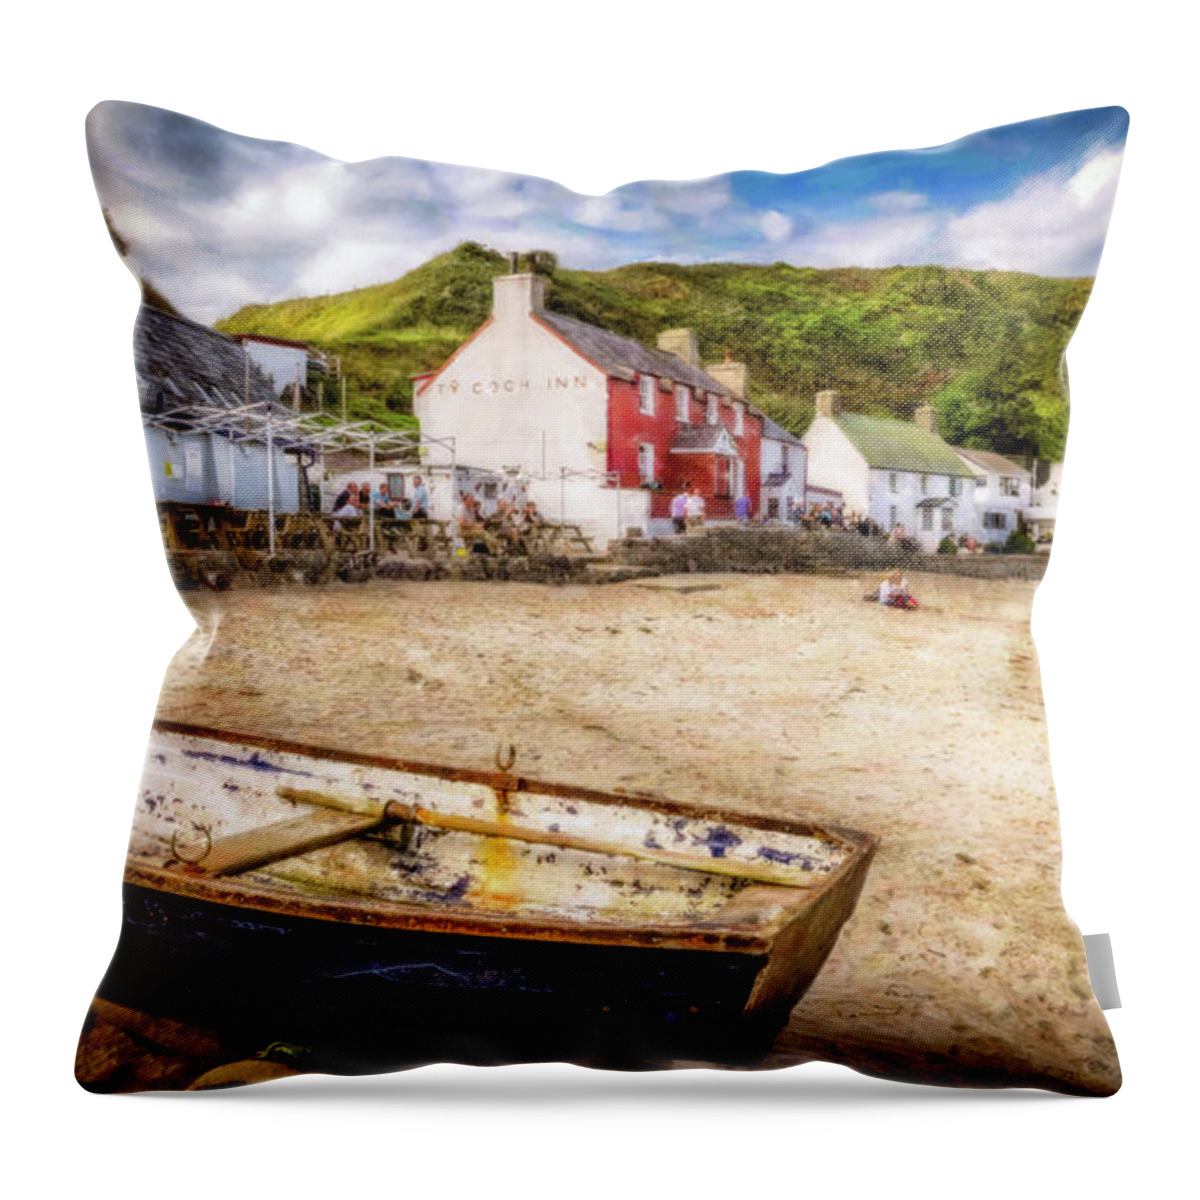 Ty Coch Throw Pillow featuring the photograph Ty Coch Inn Morfa Nefyn by Adrian Evans